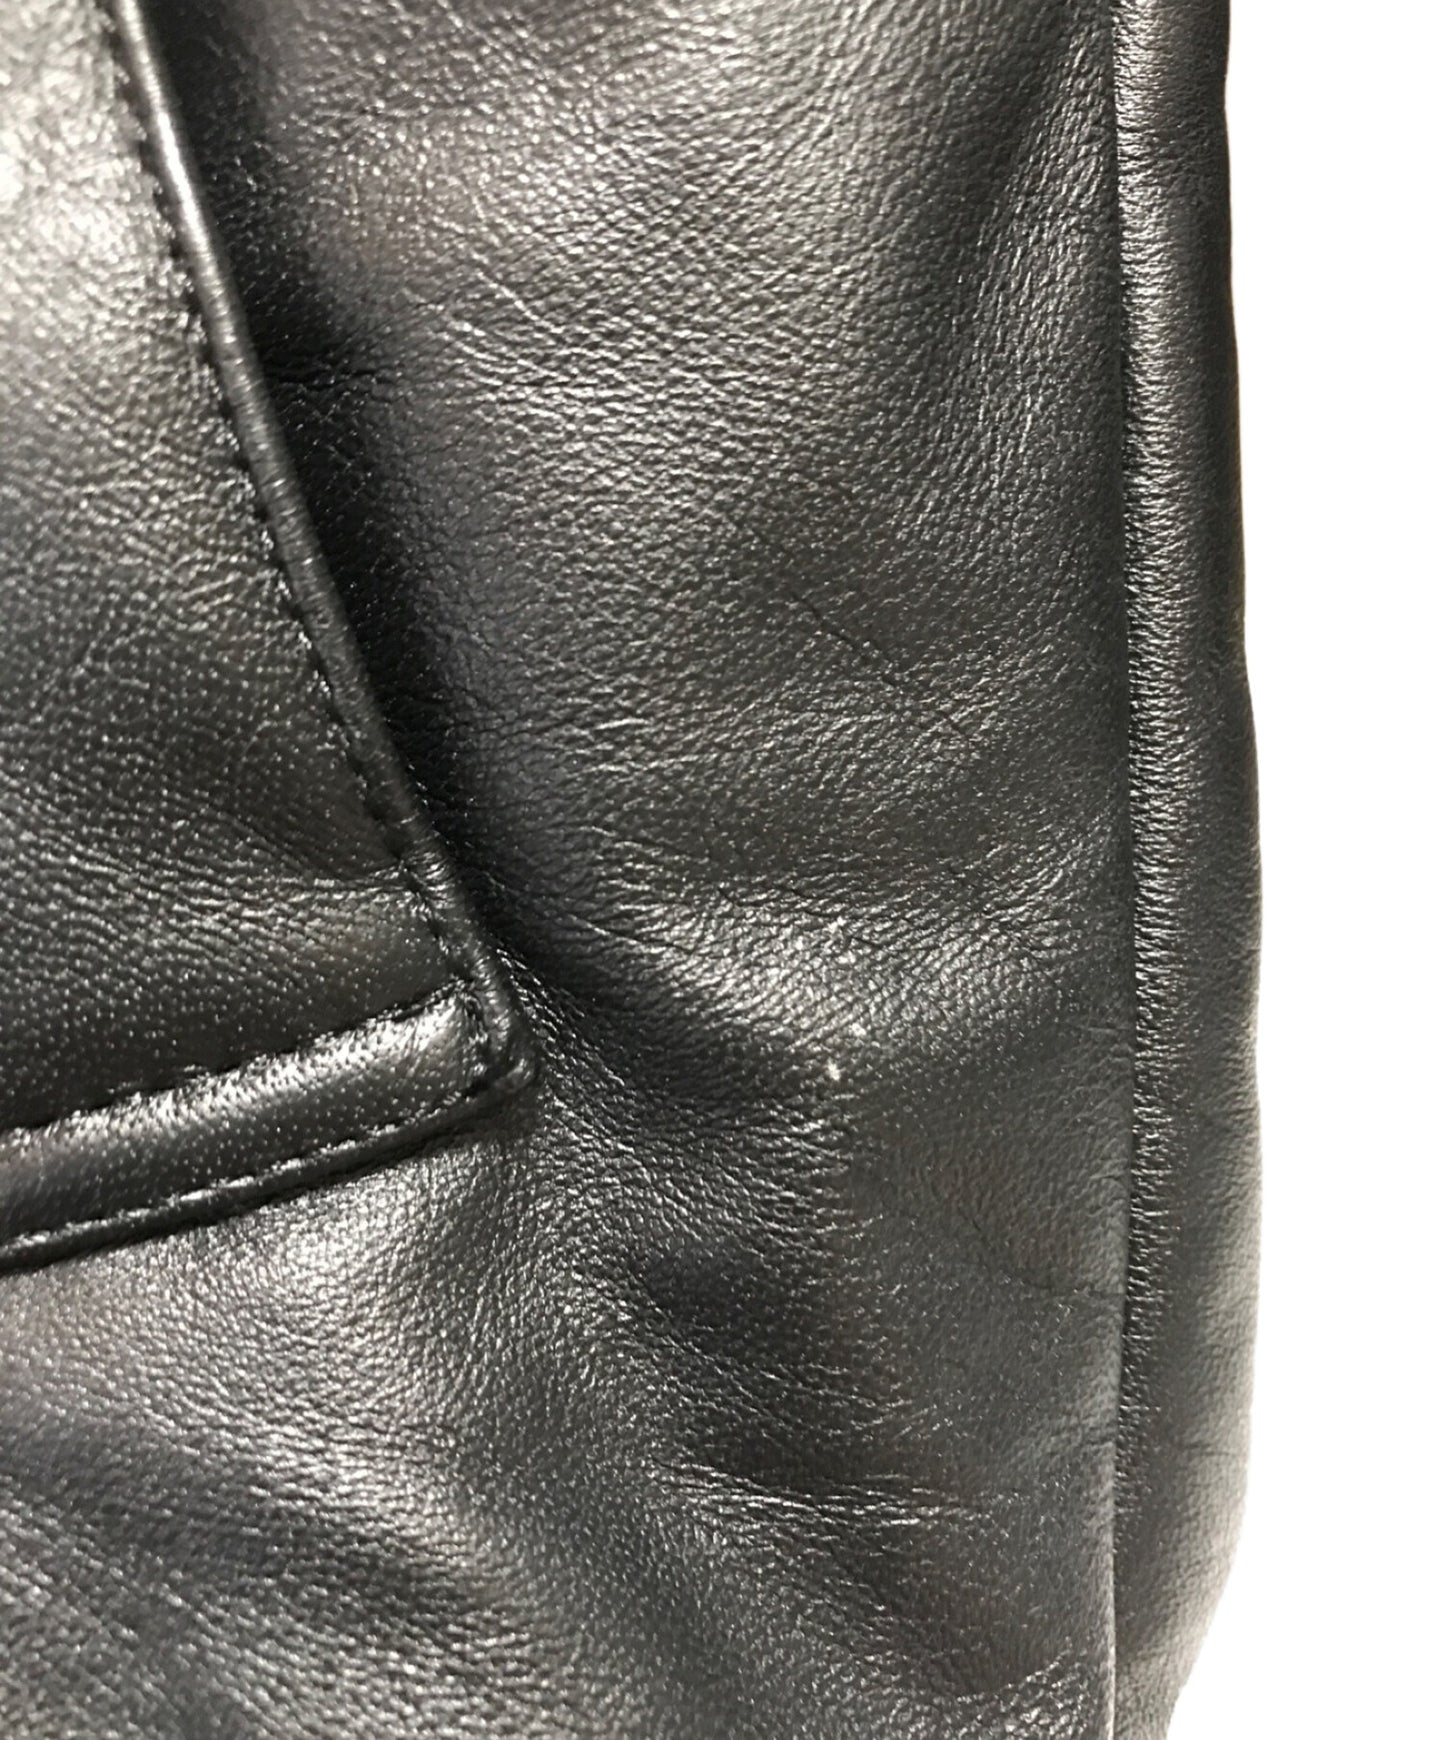 [Pre-owned] WACKO MARIA LEATHER DOWN JACKET